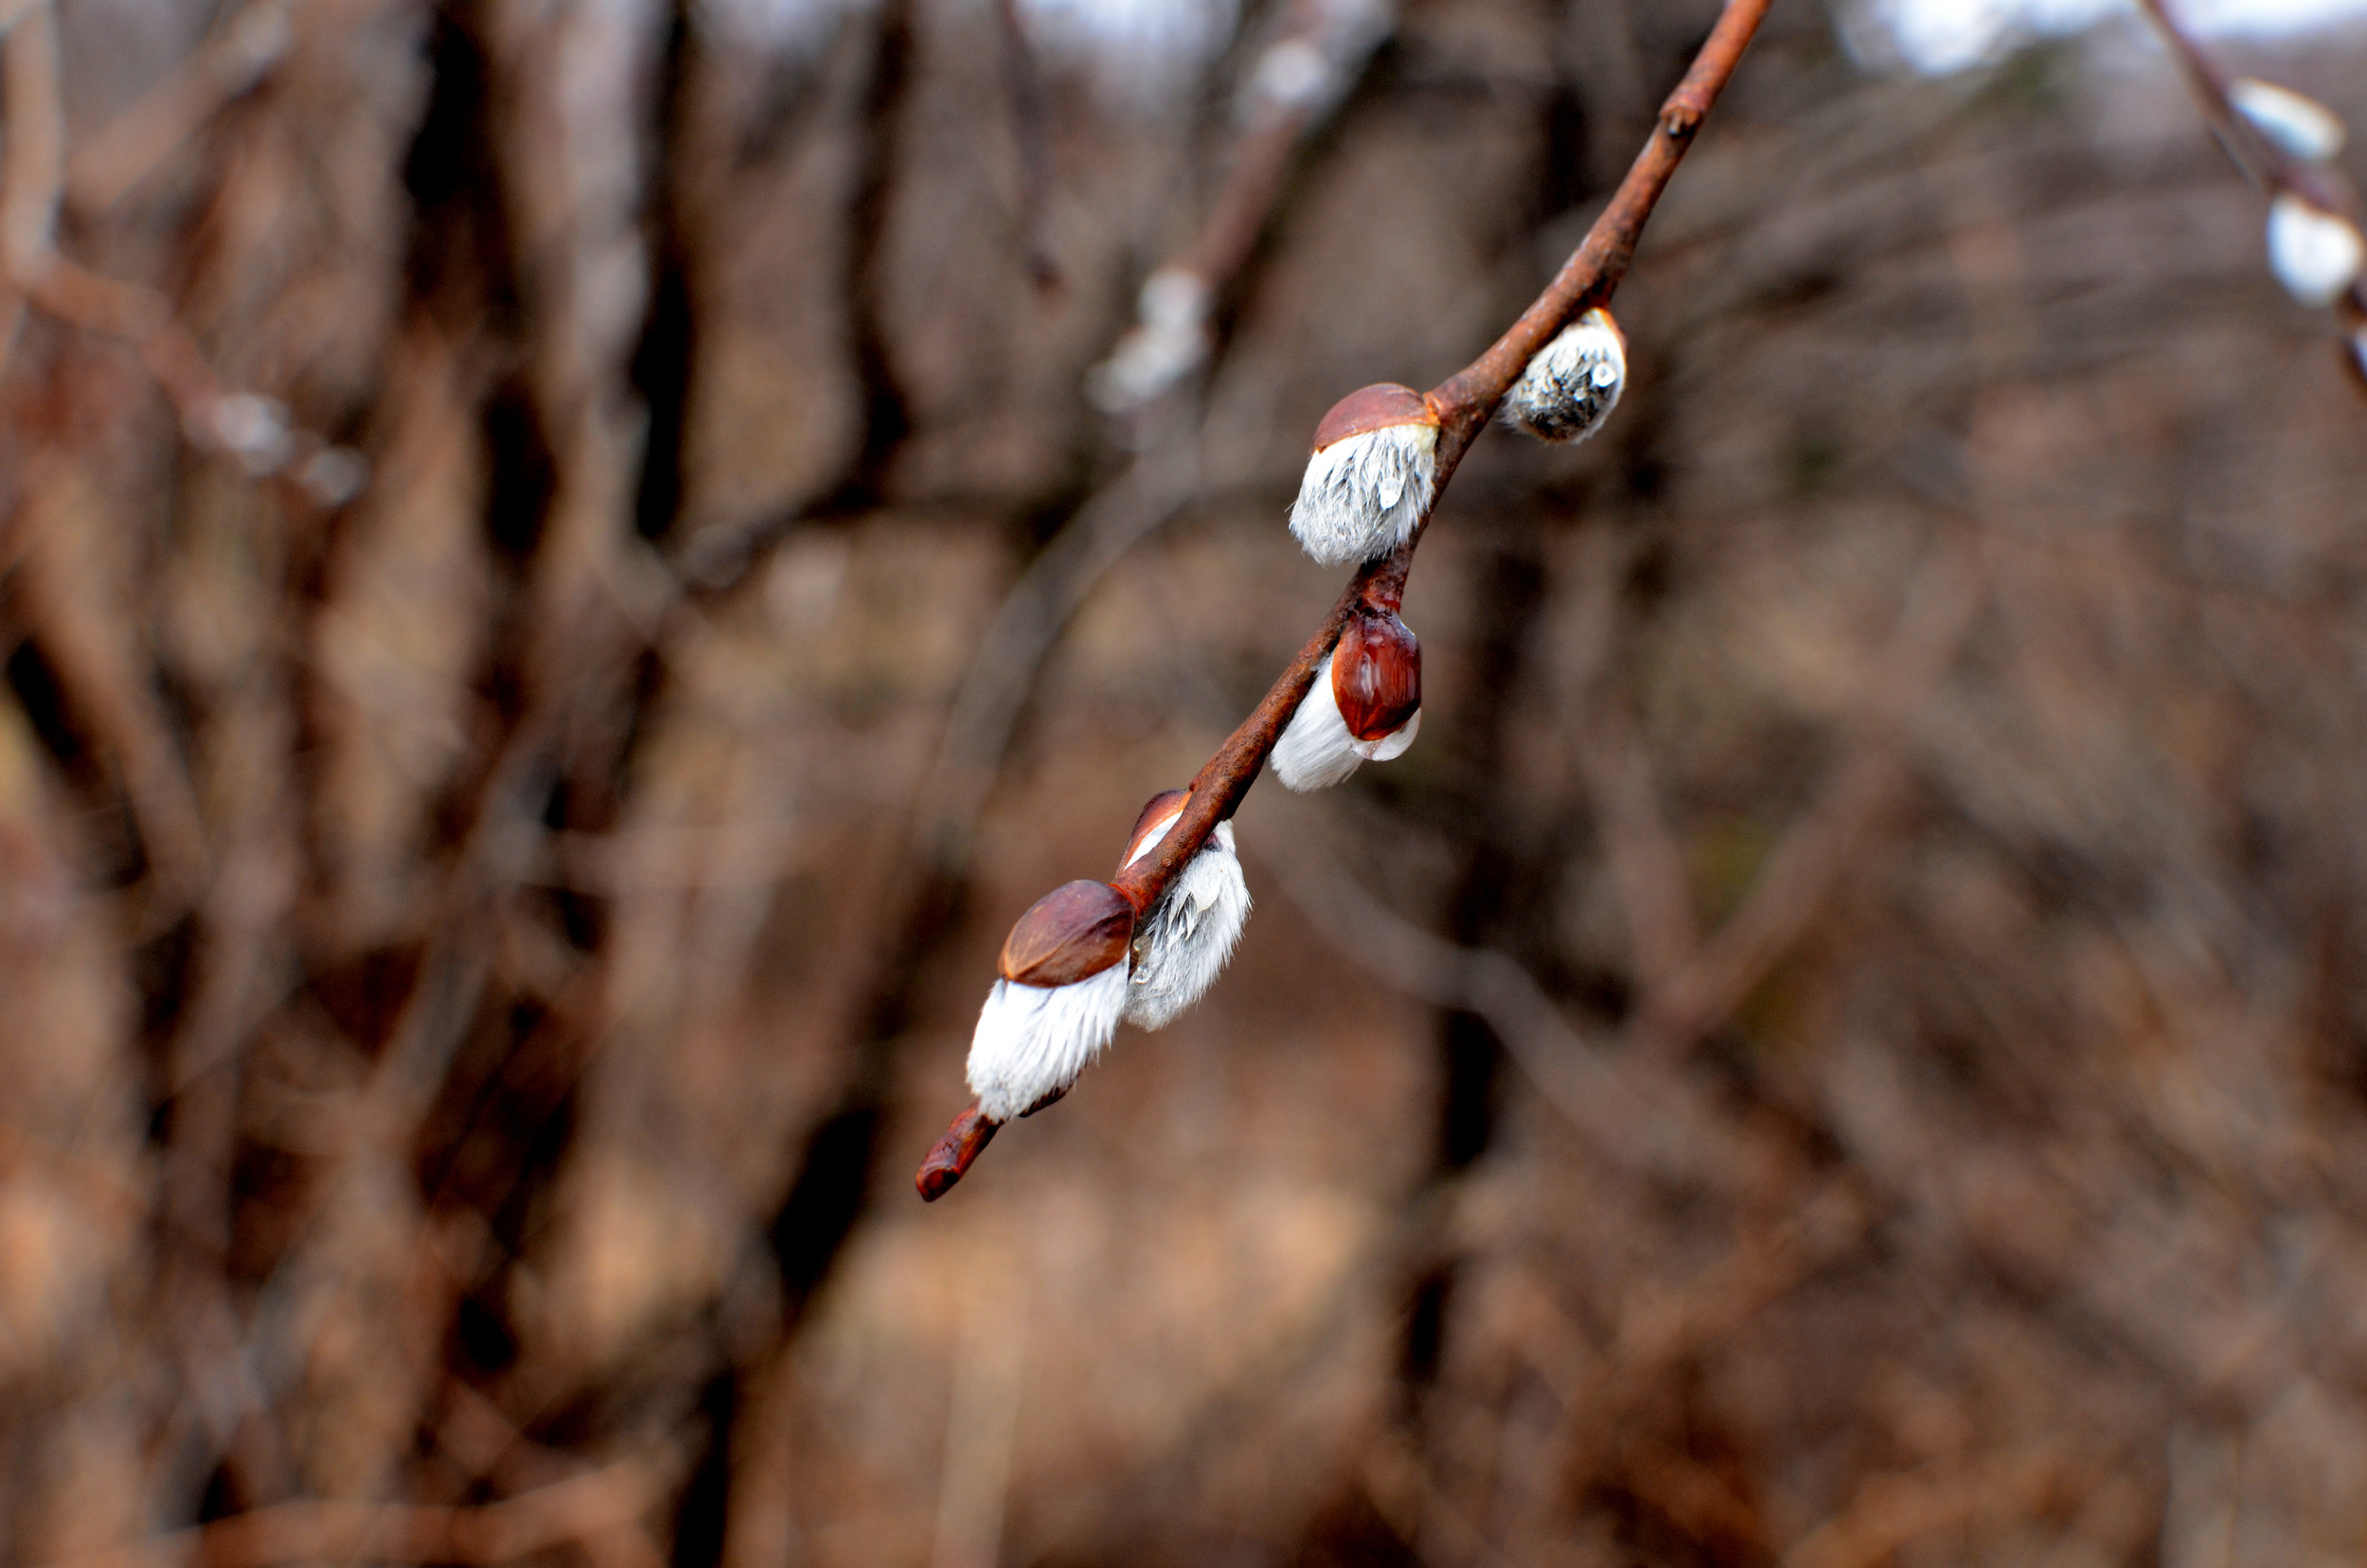 Pussy willow catkins - Christina Rosalie